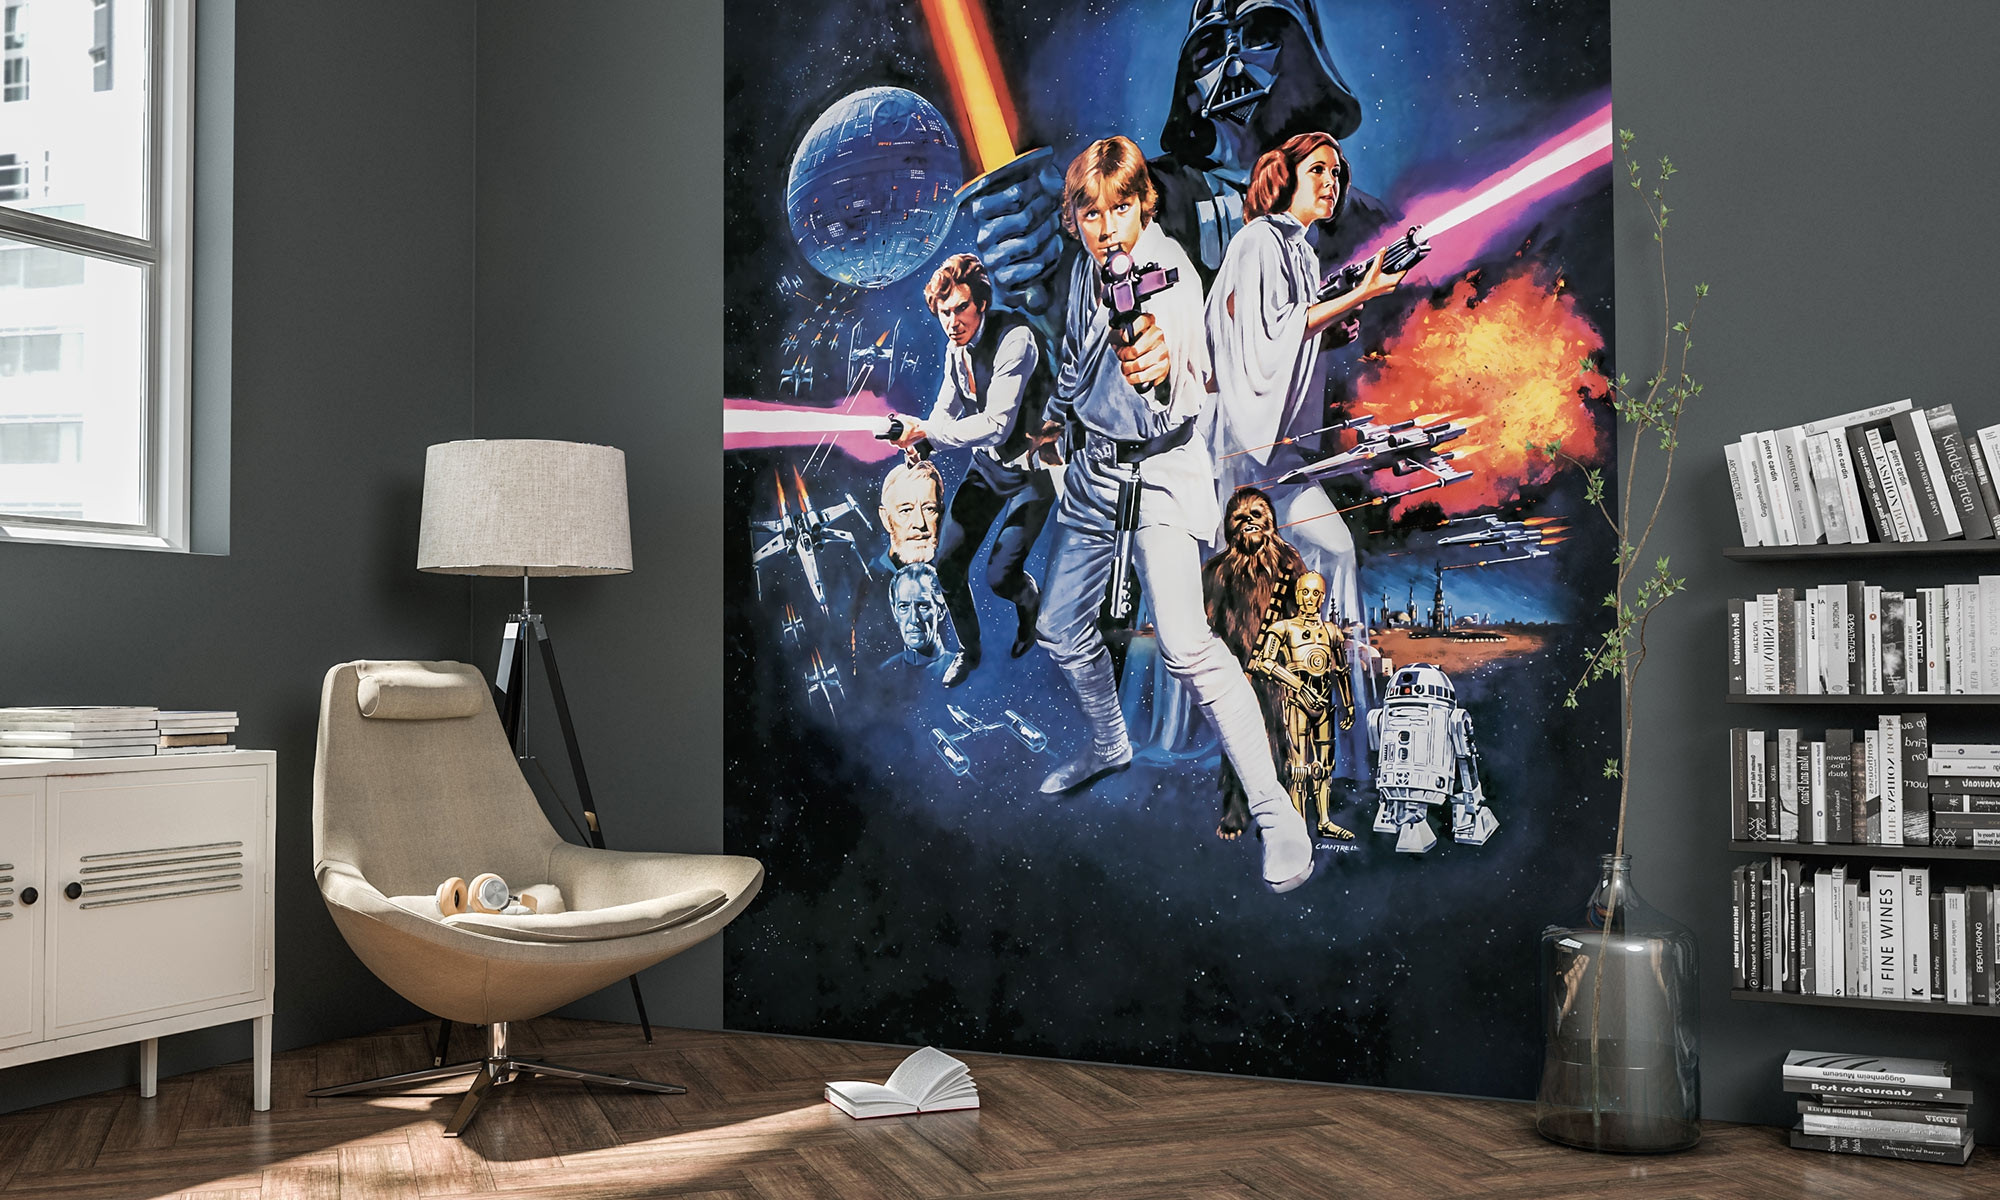 Wall Mural wallpapers CHILDREN'S ROOM photomurals poster style Star Wars decor 